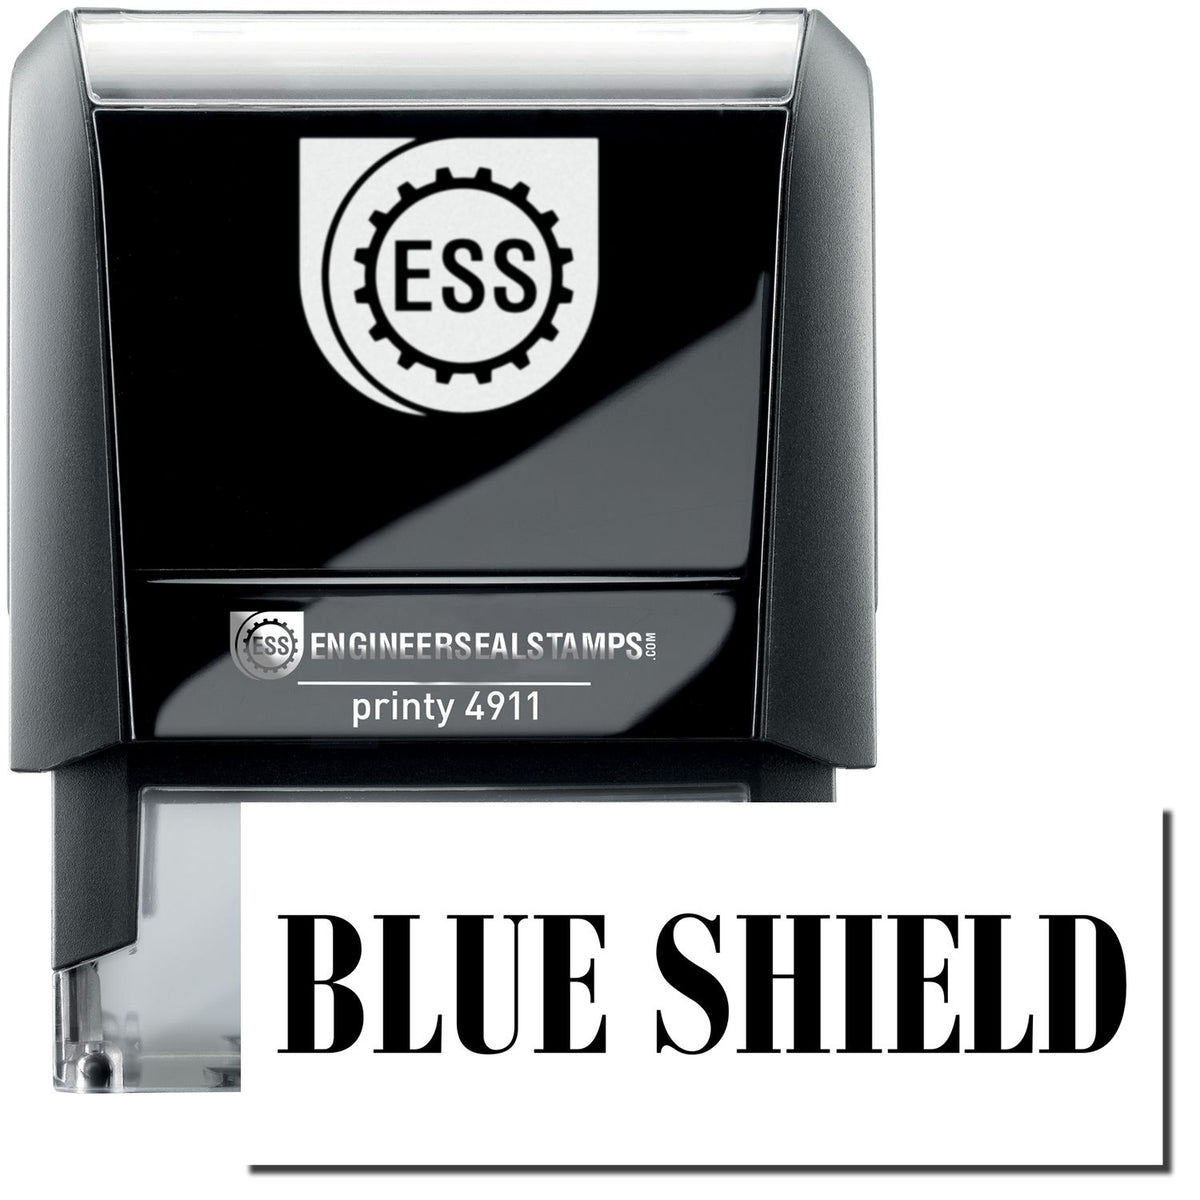 A self-inking stamp with a stamped image showing how the text &quot;BLUE SHIELD&quot; is displayed after stamping.